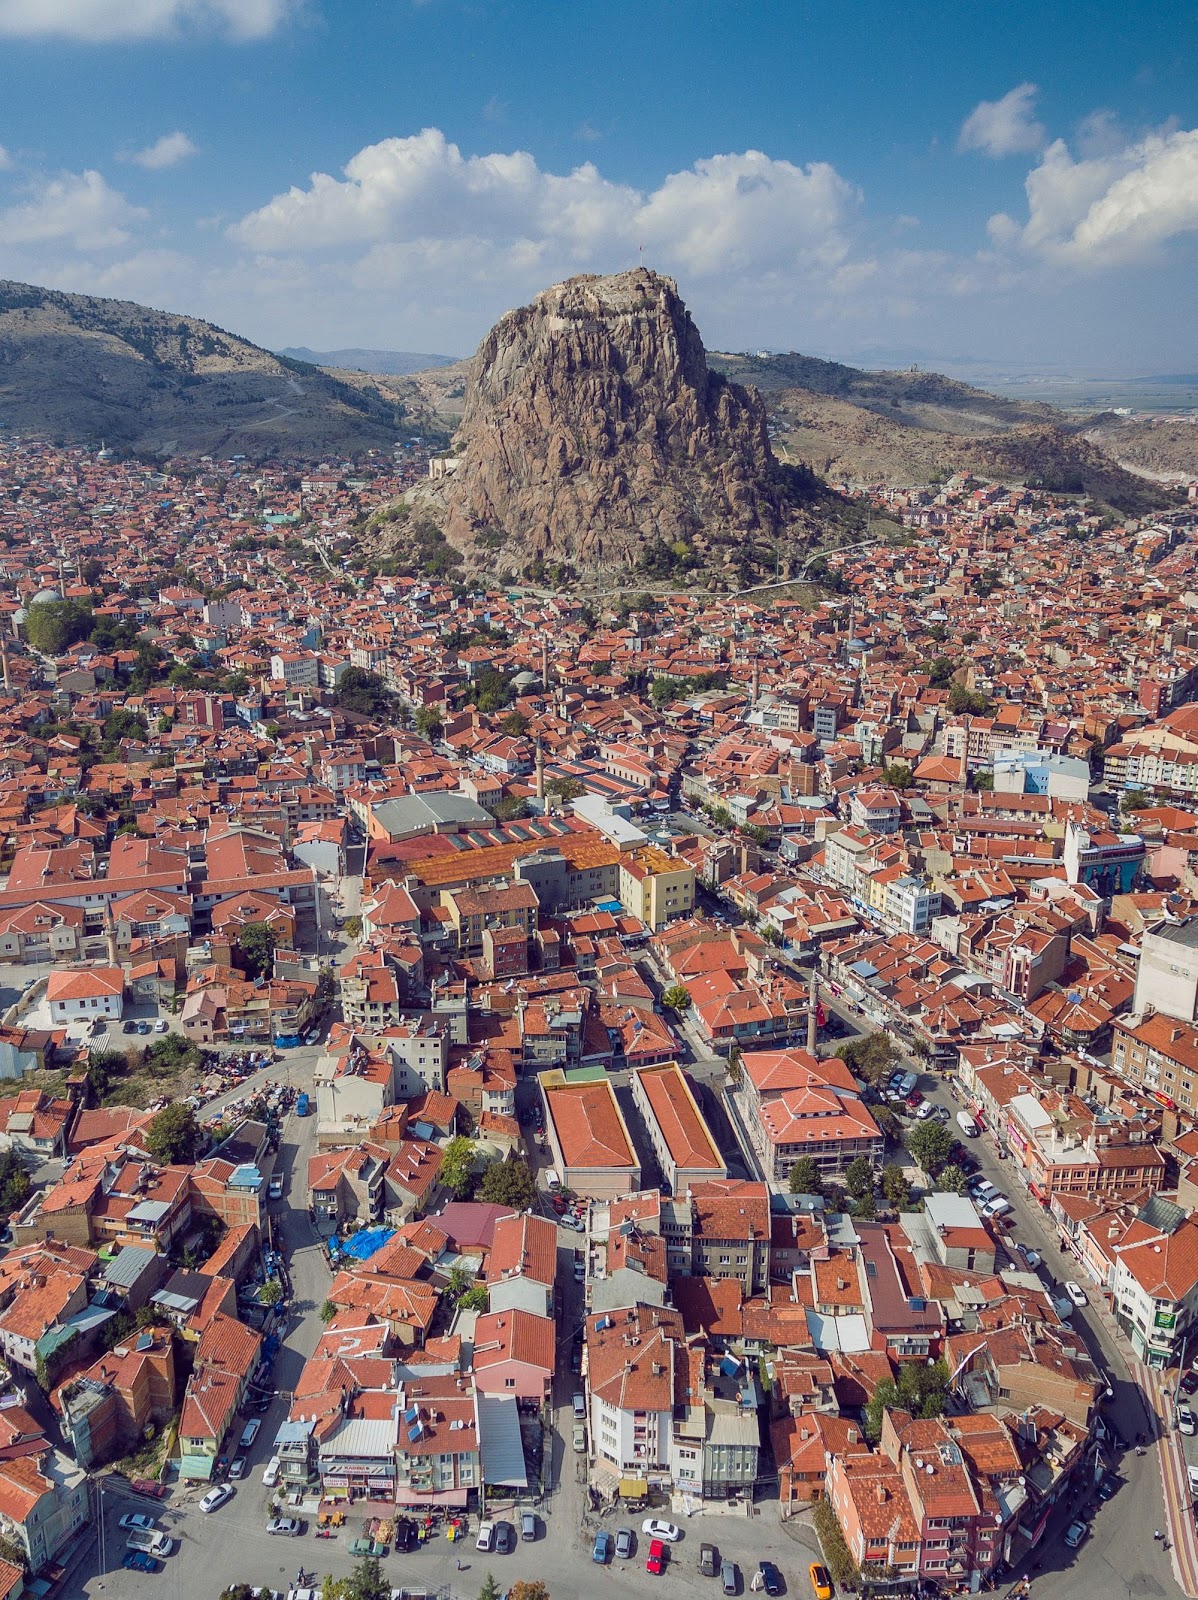 Afyon Castle and Afyon City view from Hidirlik Hill